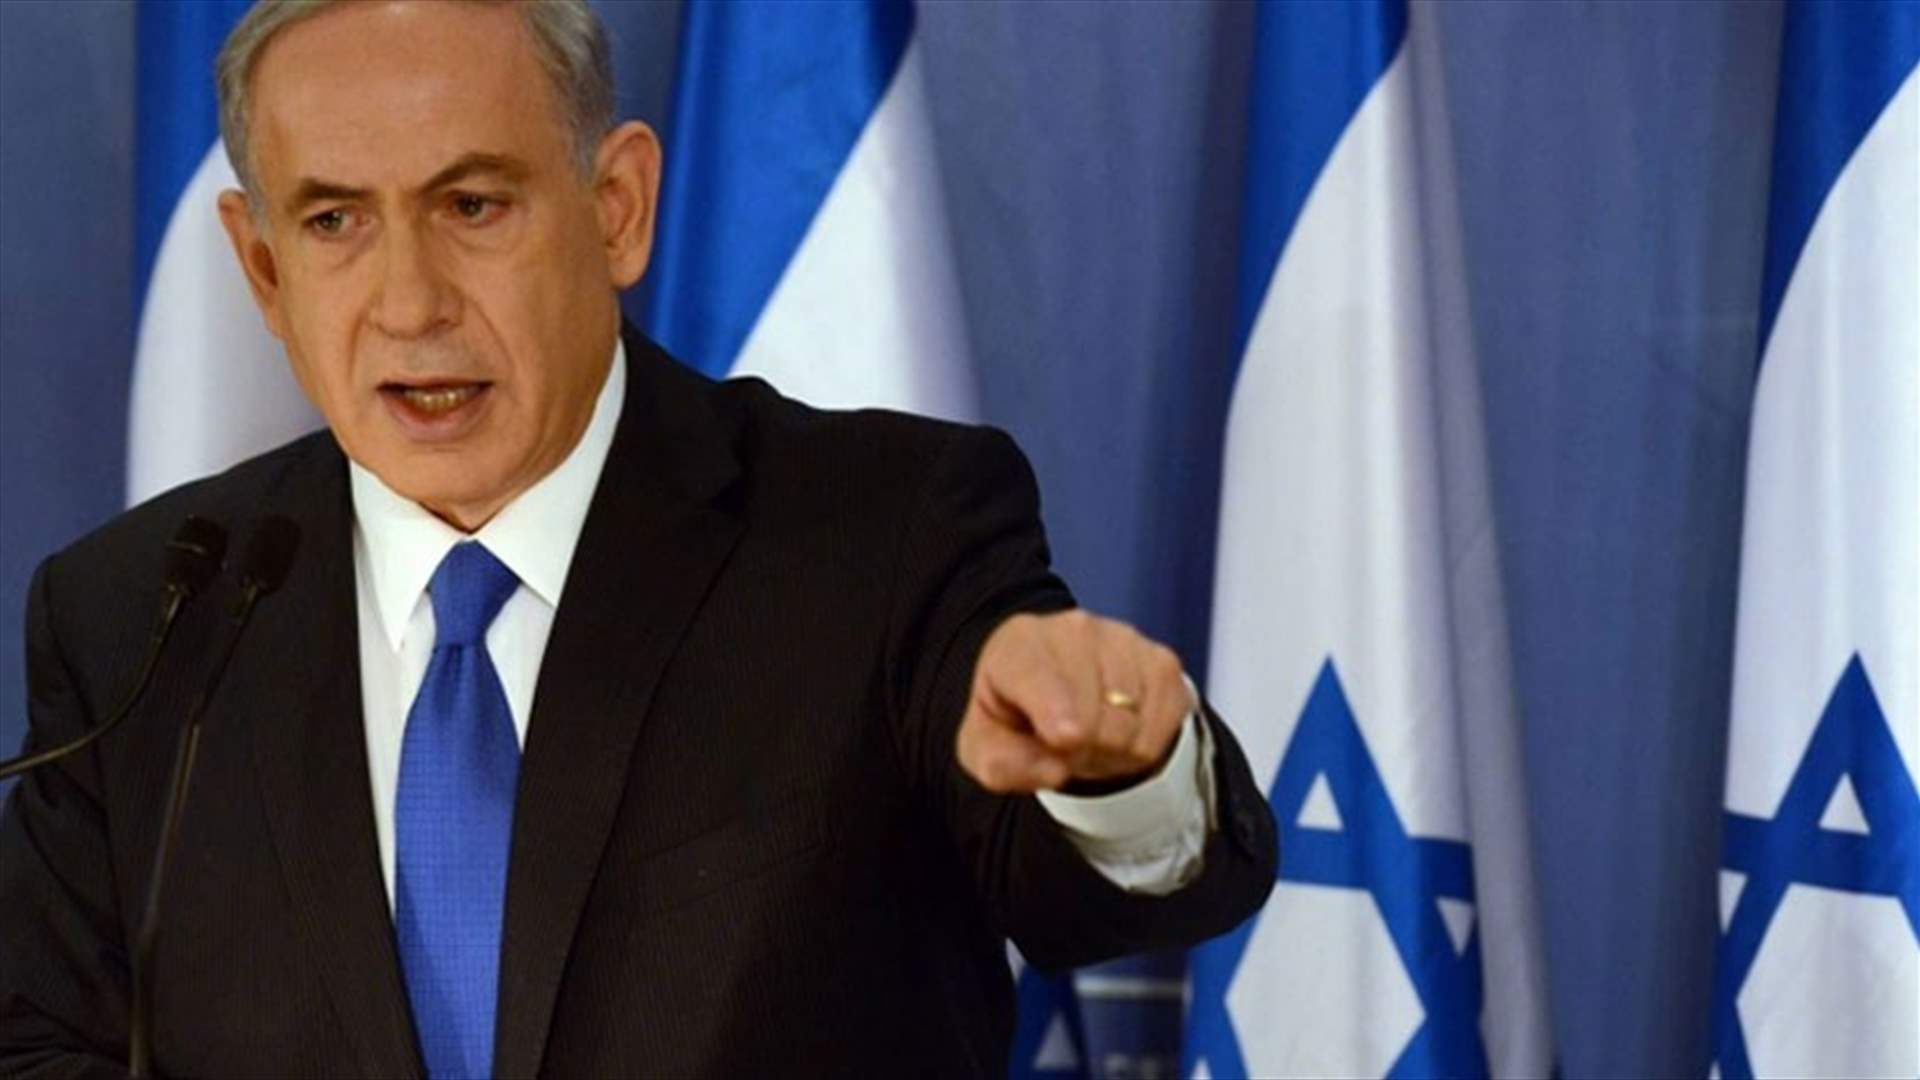 Netanyahu snubs German minister over plan to meet rights groups